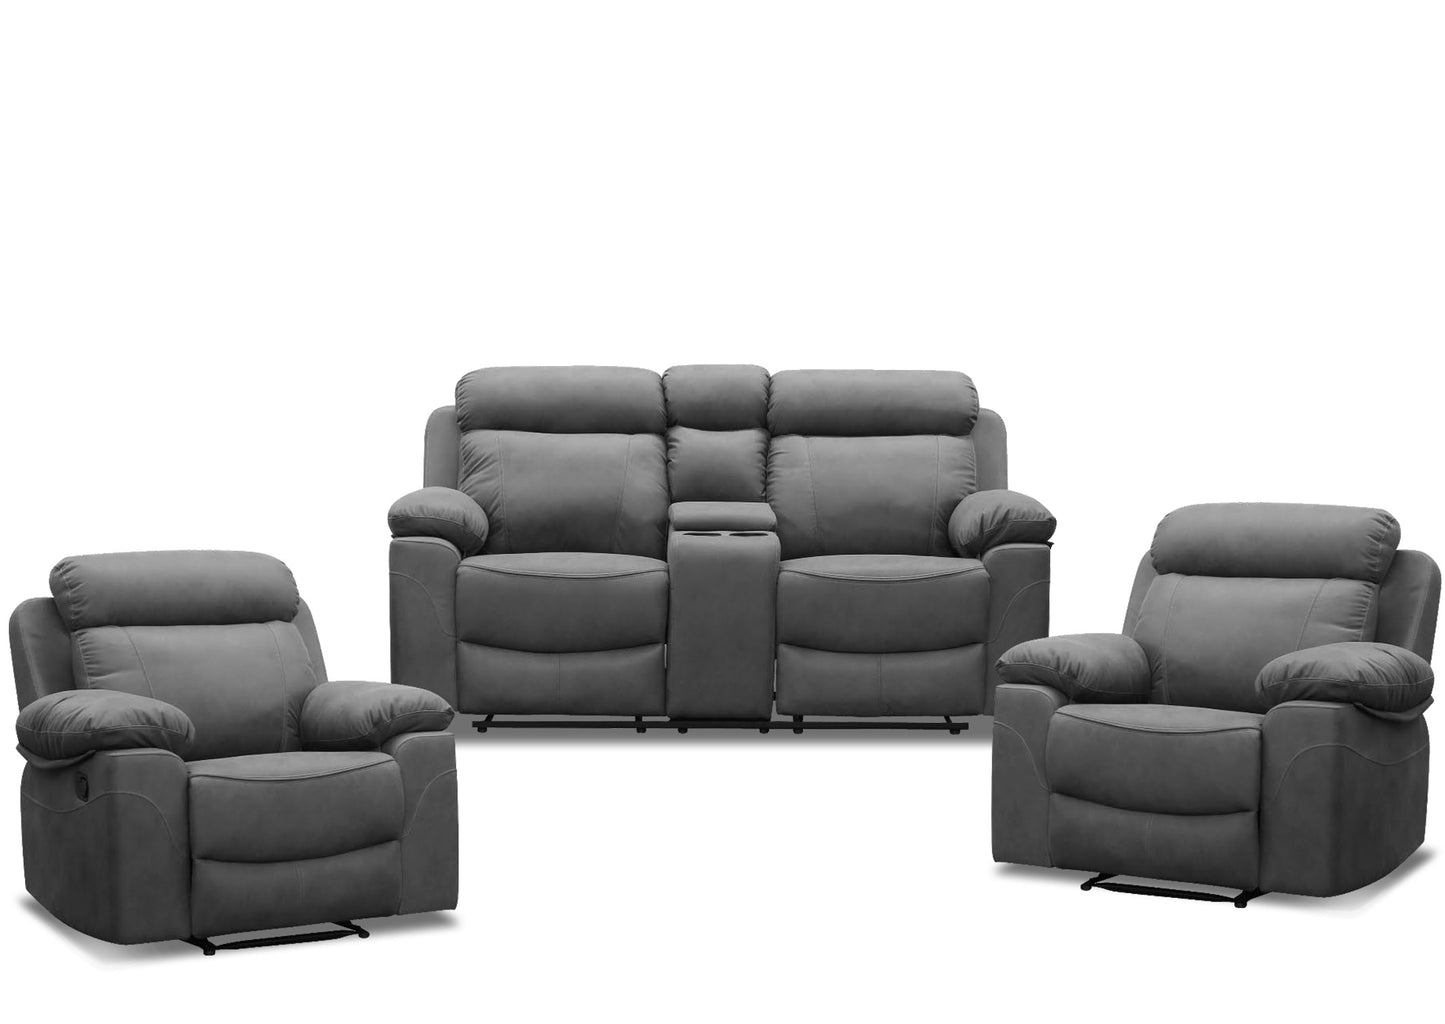 London Lounge Suite (4 Seater) - Grey